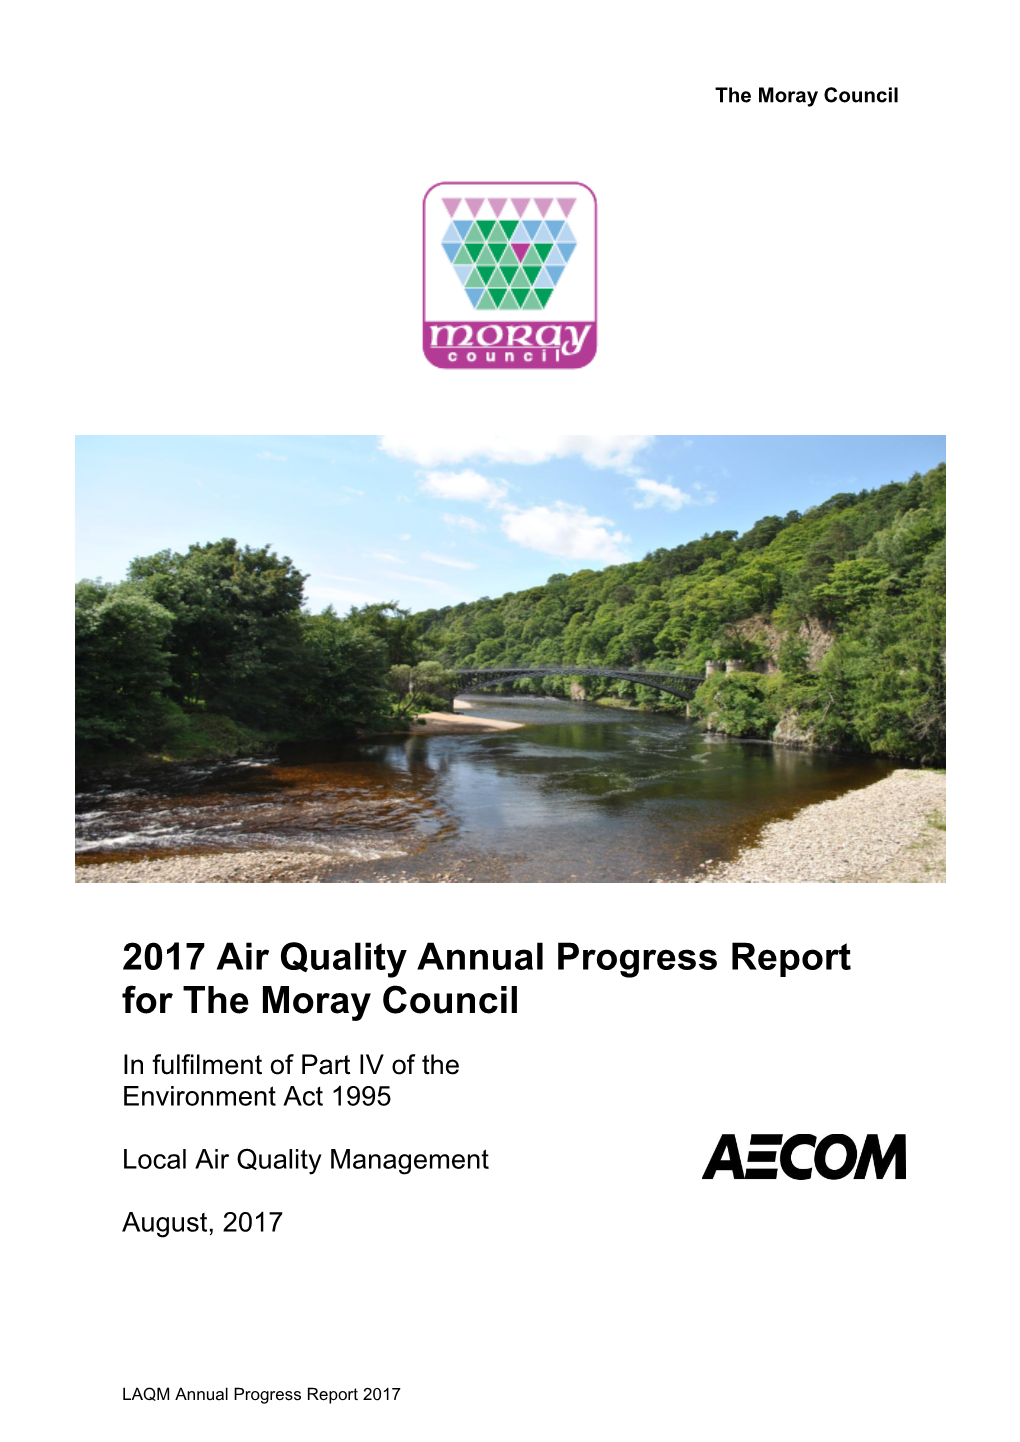 2017 Air Quality Annual Progress Report for the Moray Council